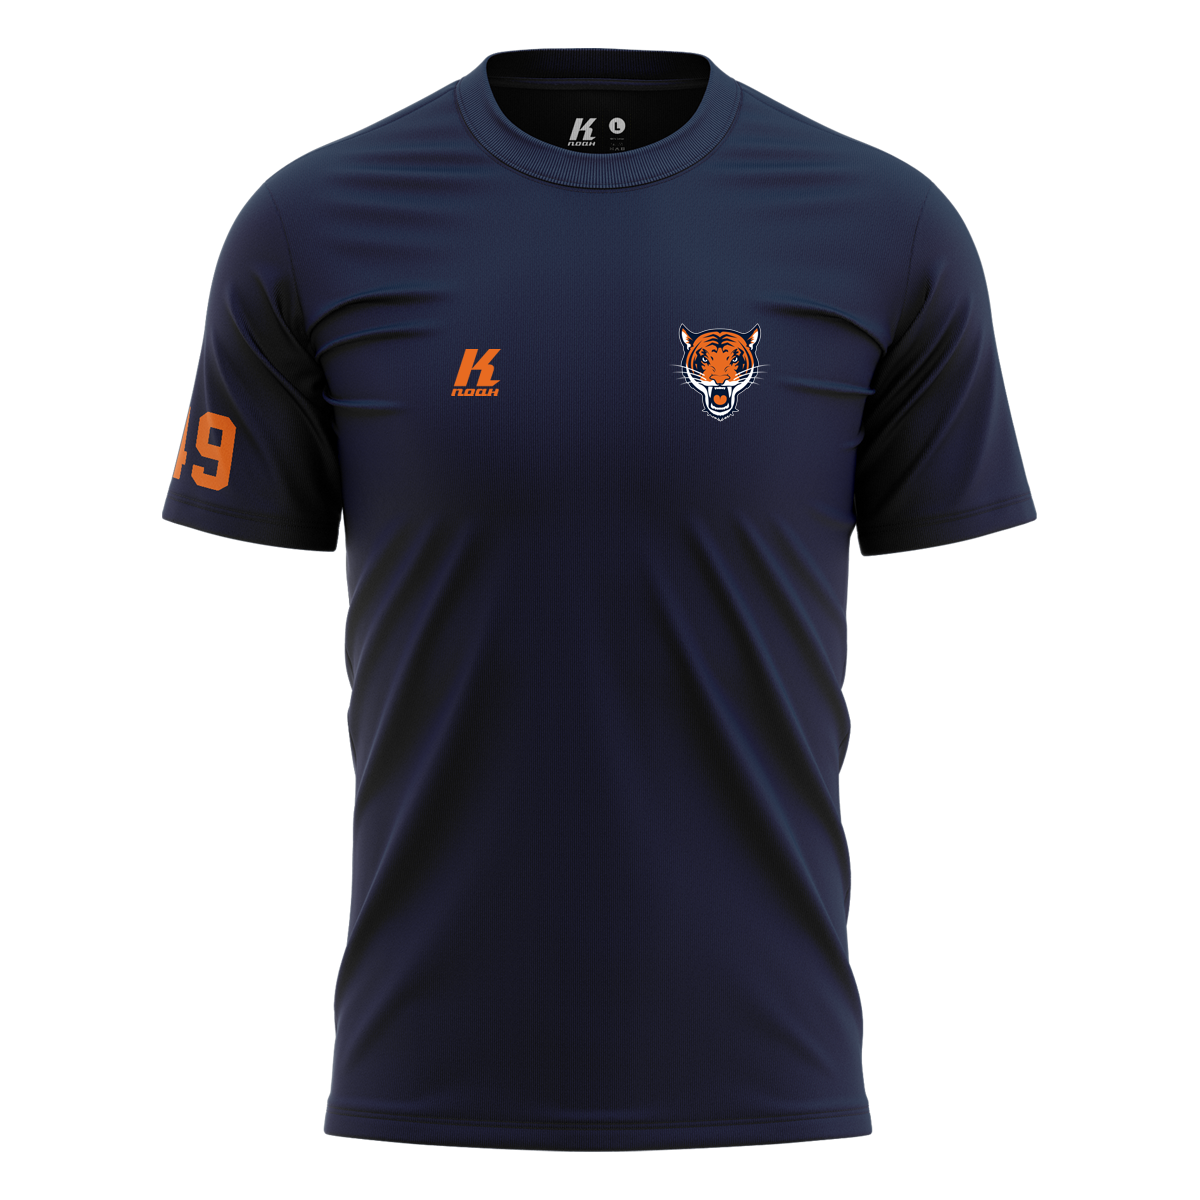 Tigers Basic Tee Primary with Playernumber/Initials